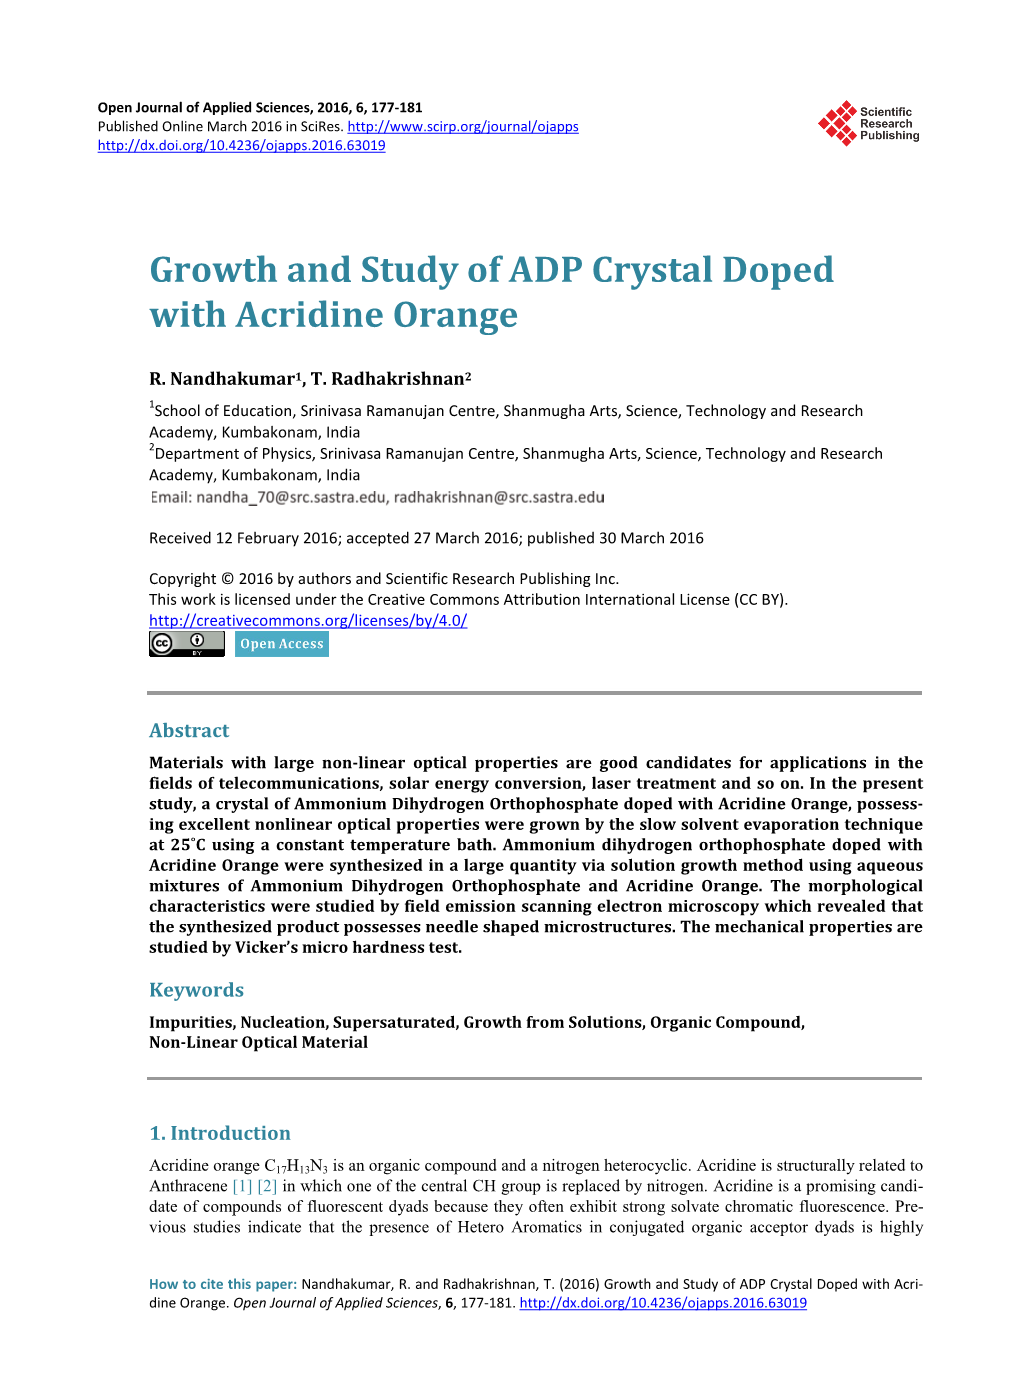 Growth and Study of ADP Crystal Doped with Acridine Orange